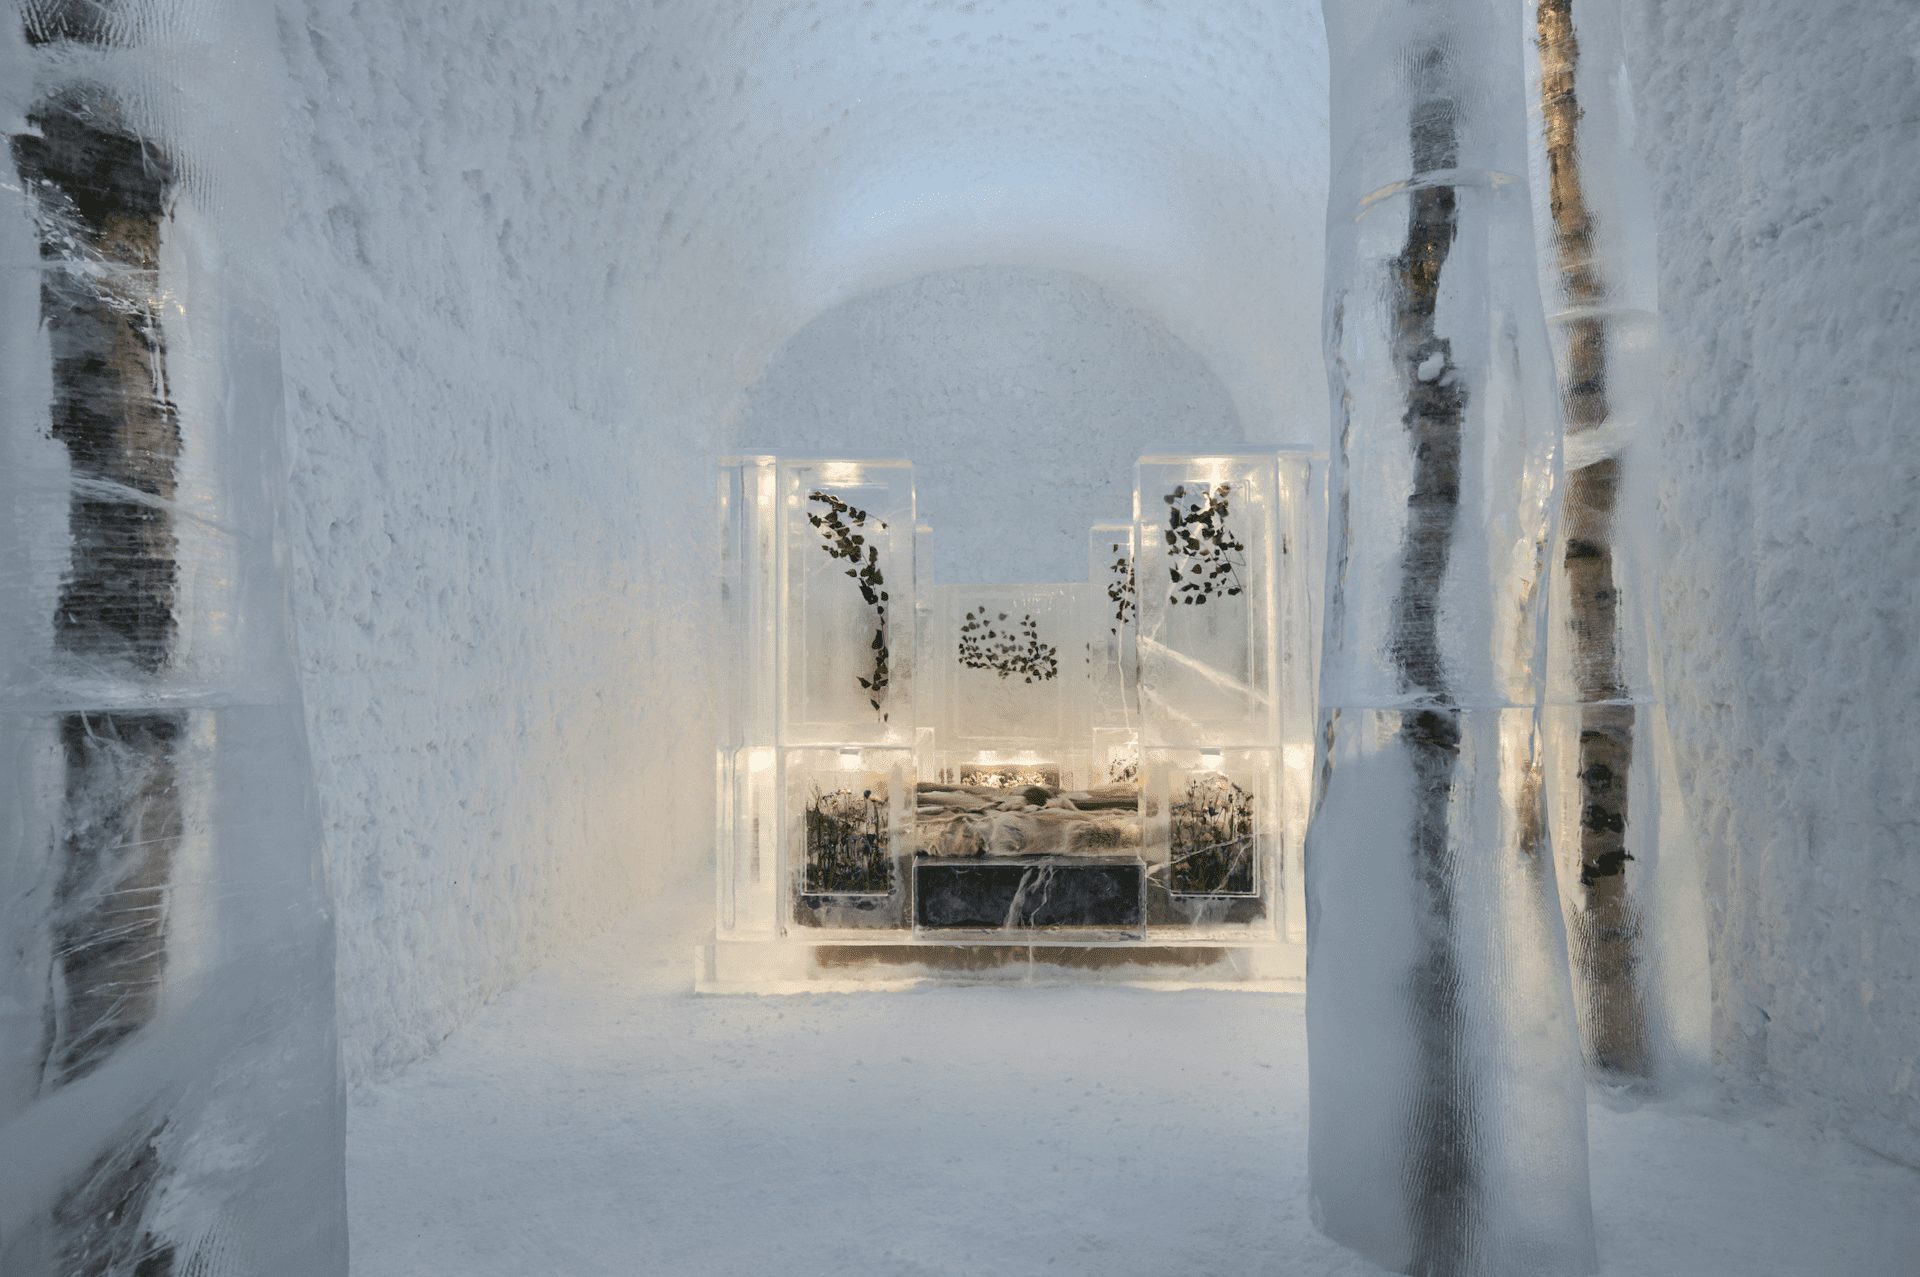 Bernadotte & Kylberg unveil suite at iconic Icehotel in Sweden